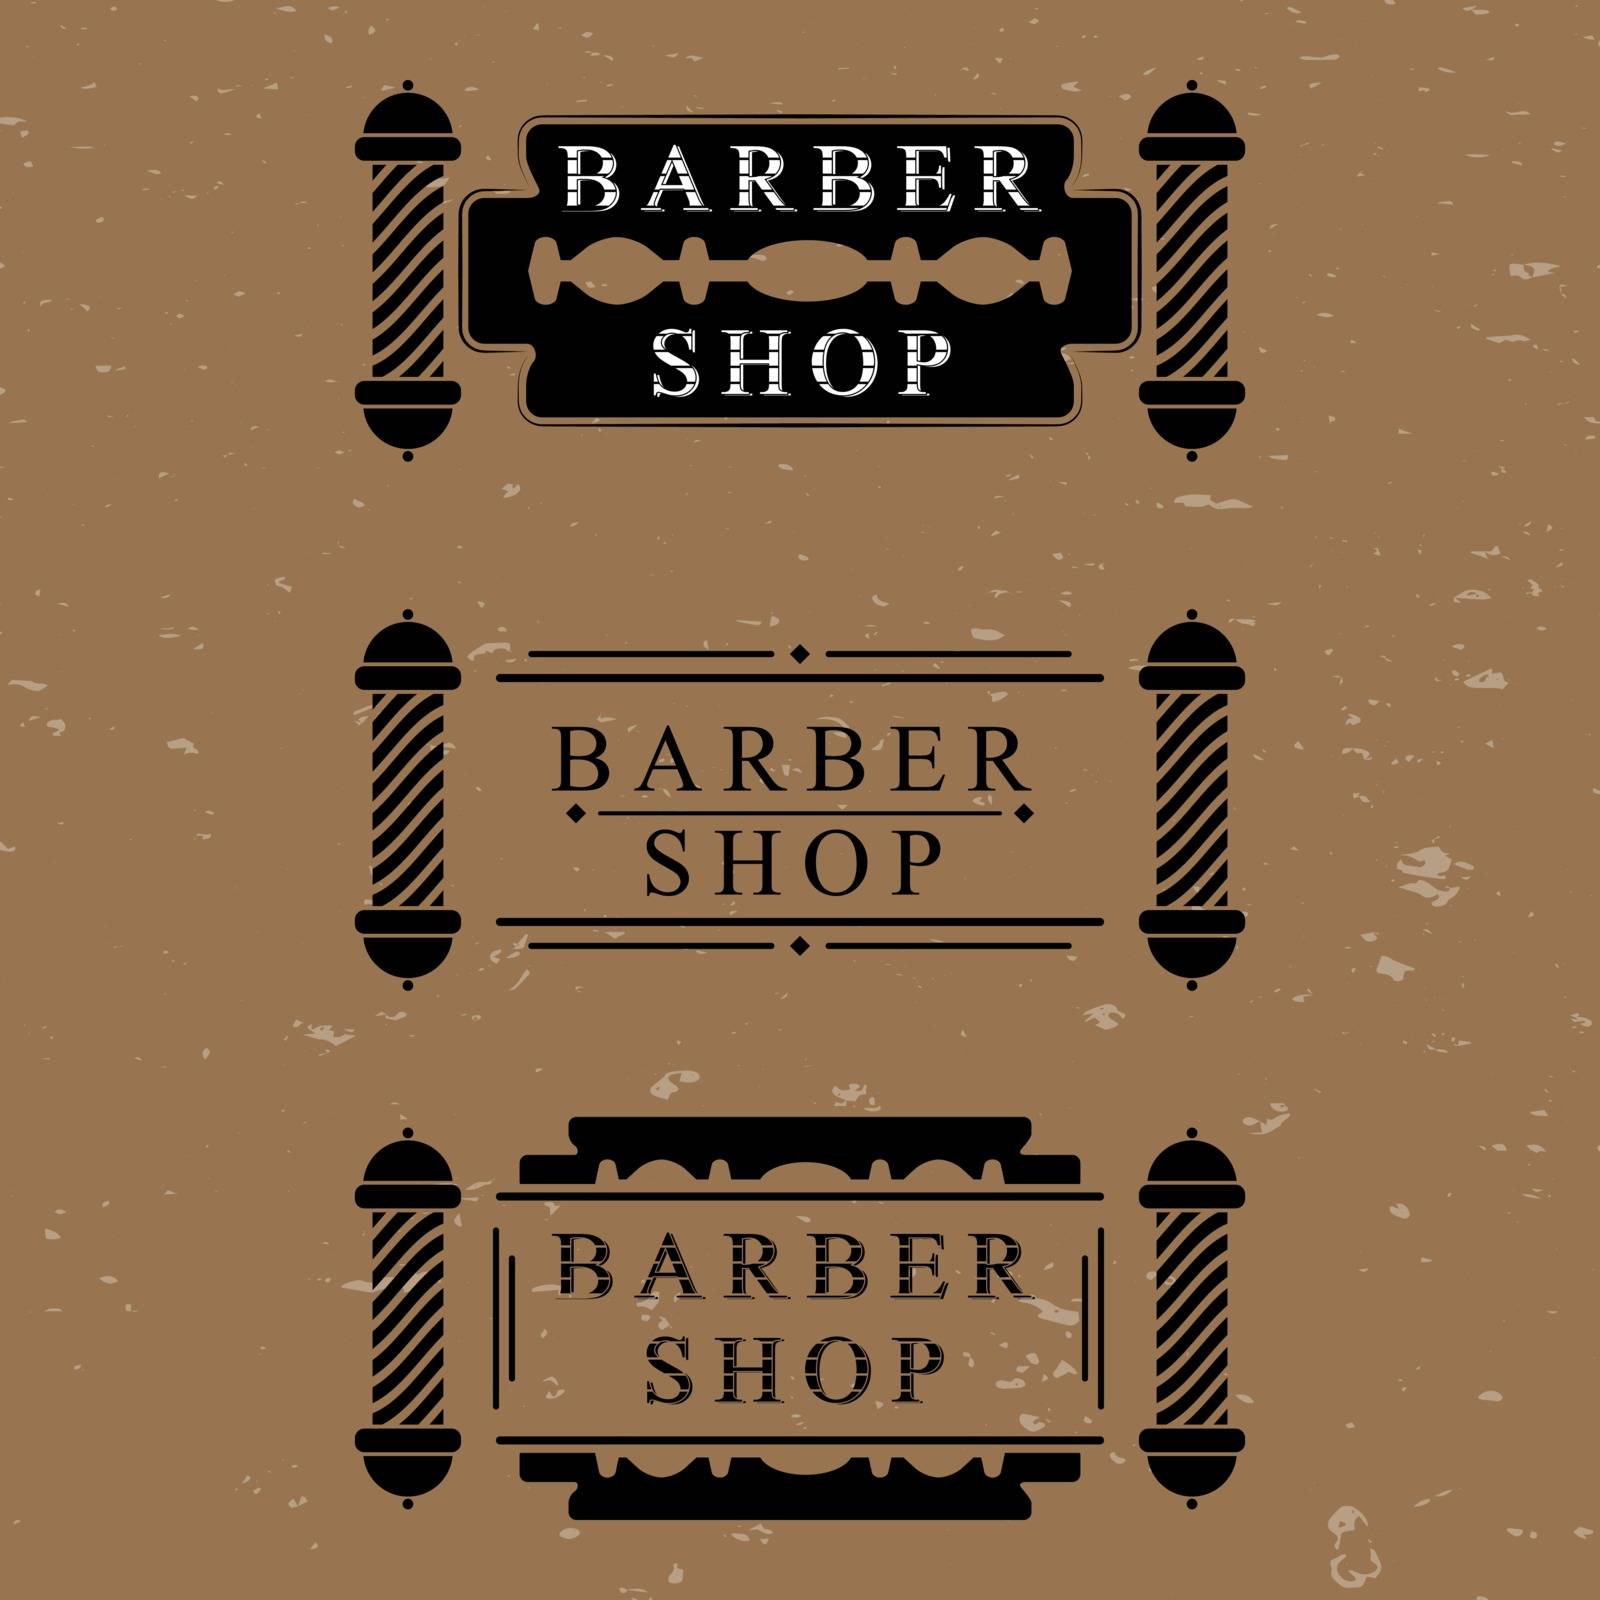 The vector set for barber shop by Vectorydraw